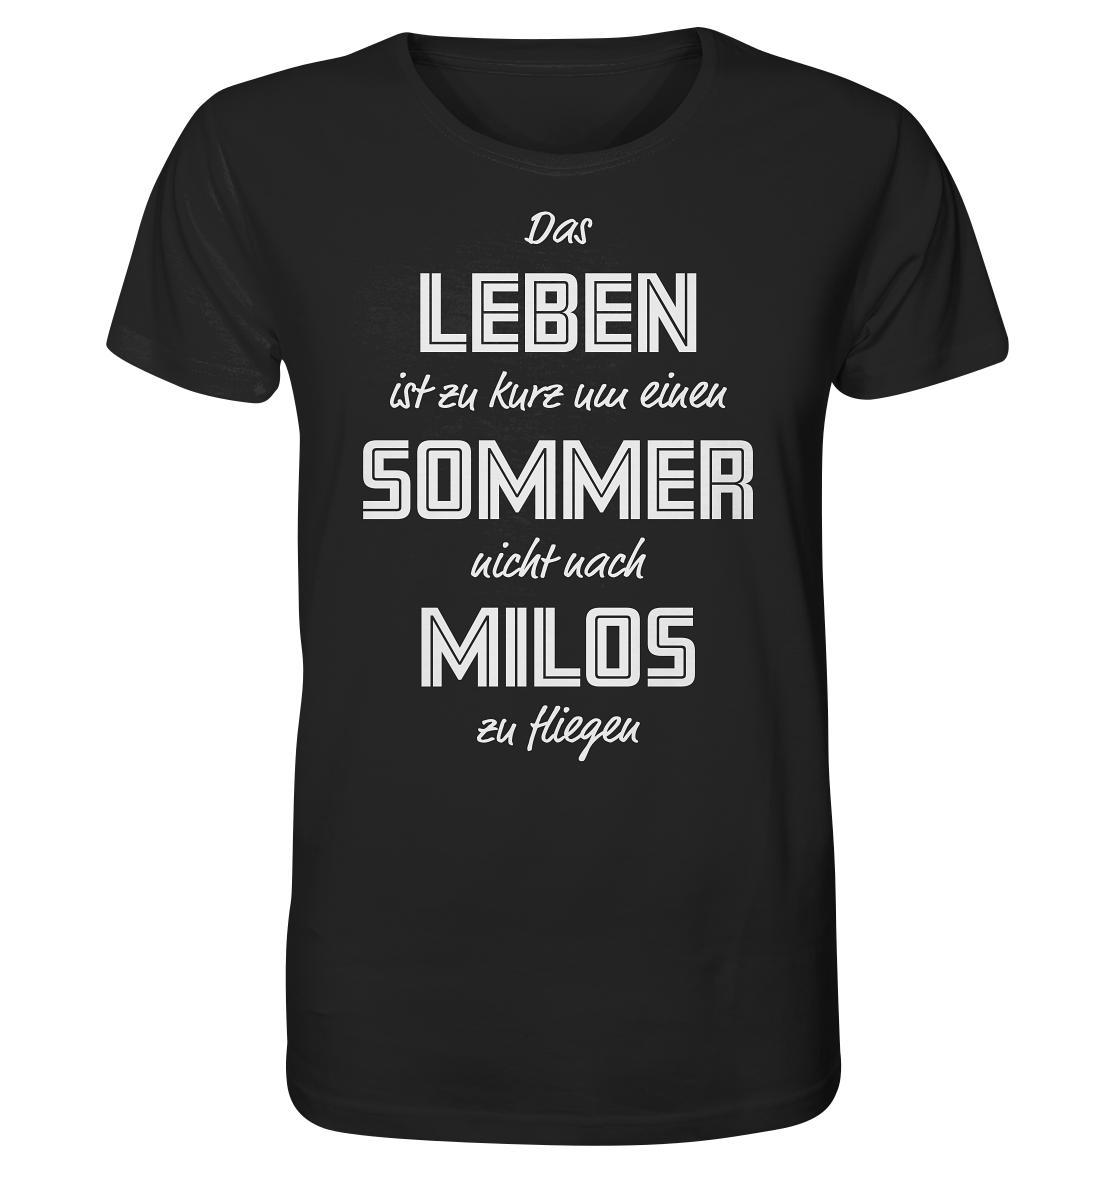 Life is too short not to fly to Milos for a summer - Organic Shirt